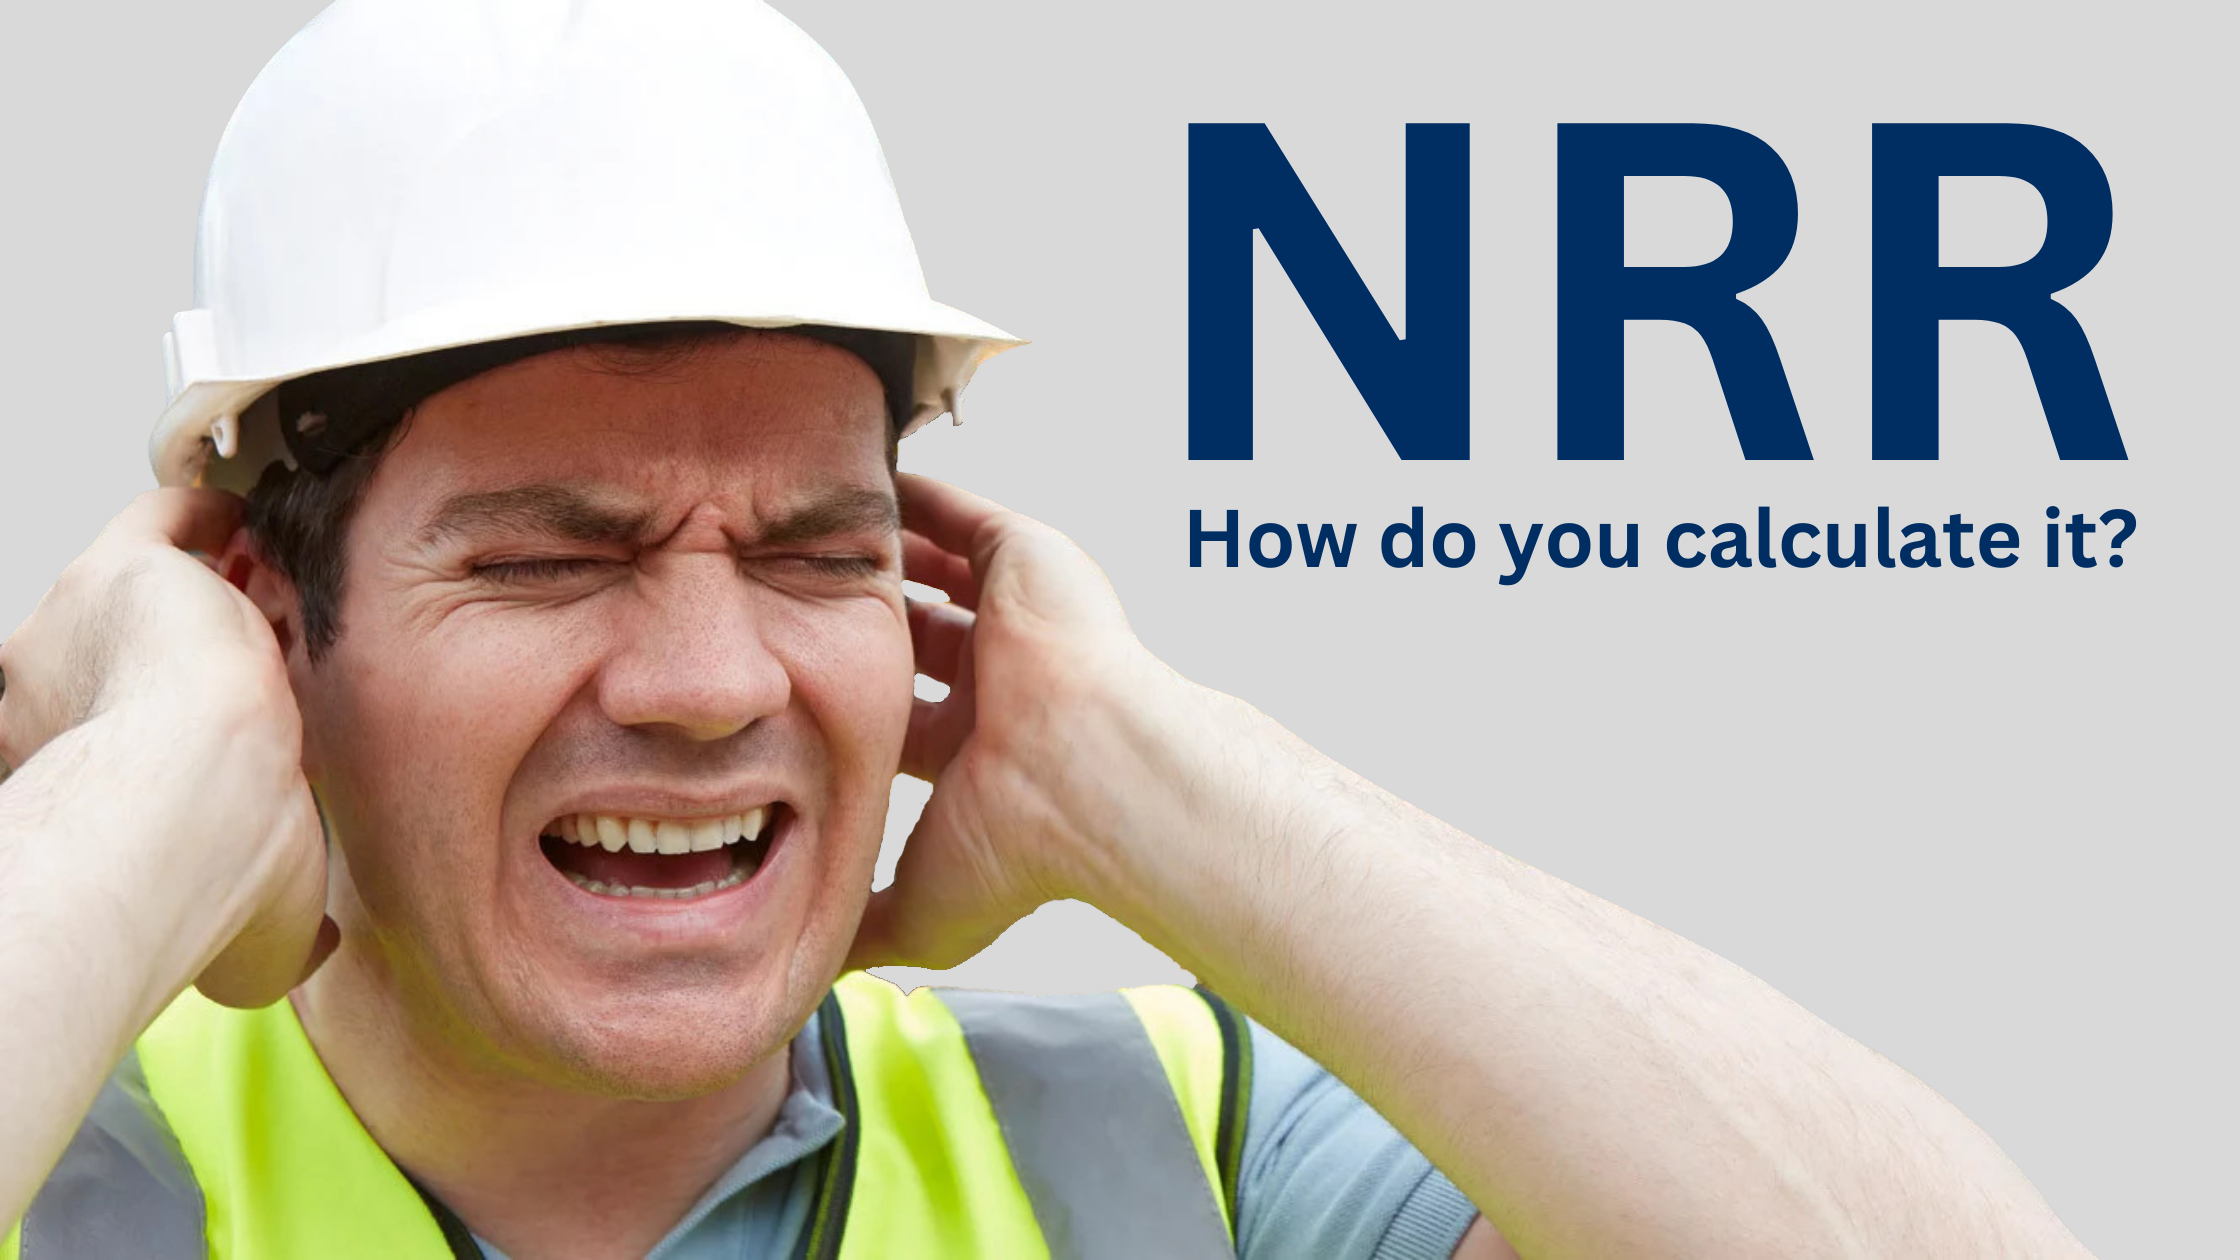 How do You Calculate Noise Reduction Rating (NRR)?